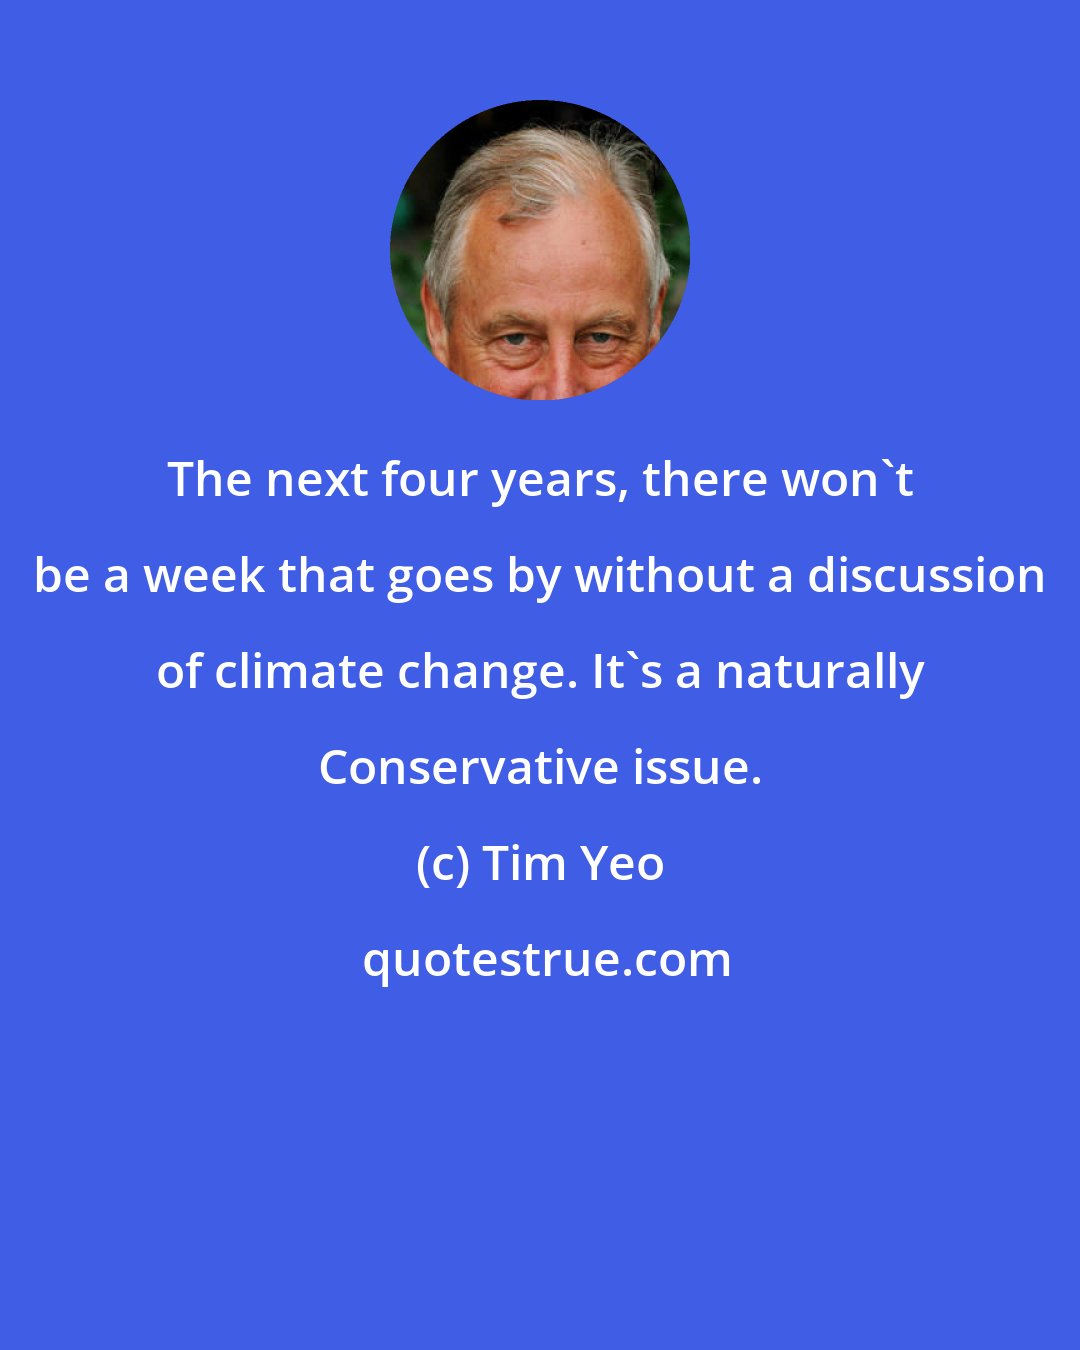 Tim Yeo: The next four years, there won't be a week that goes by without a discussion of climate change. It's a naturally Conservative issue.